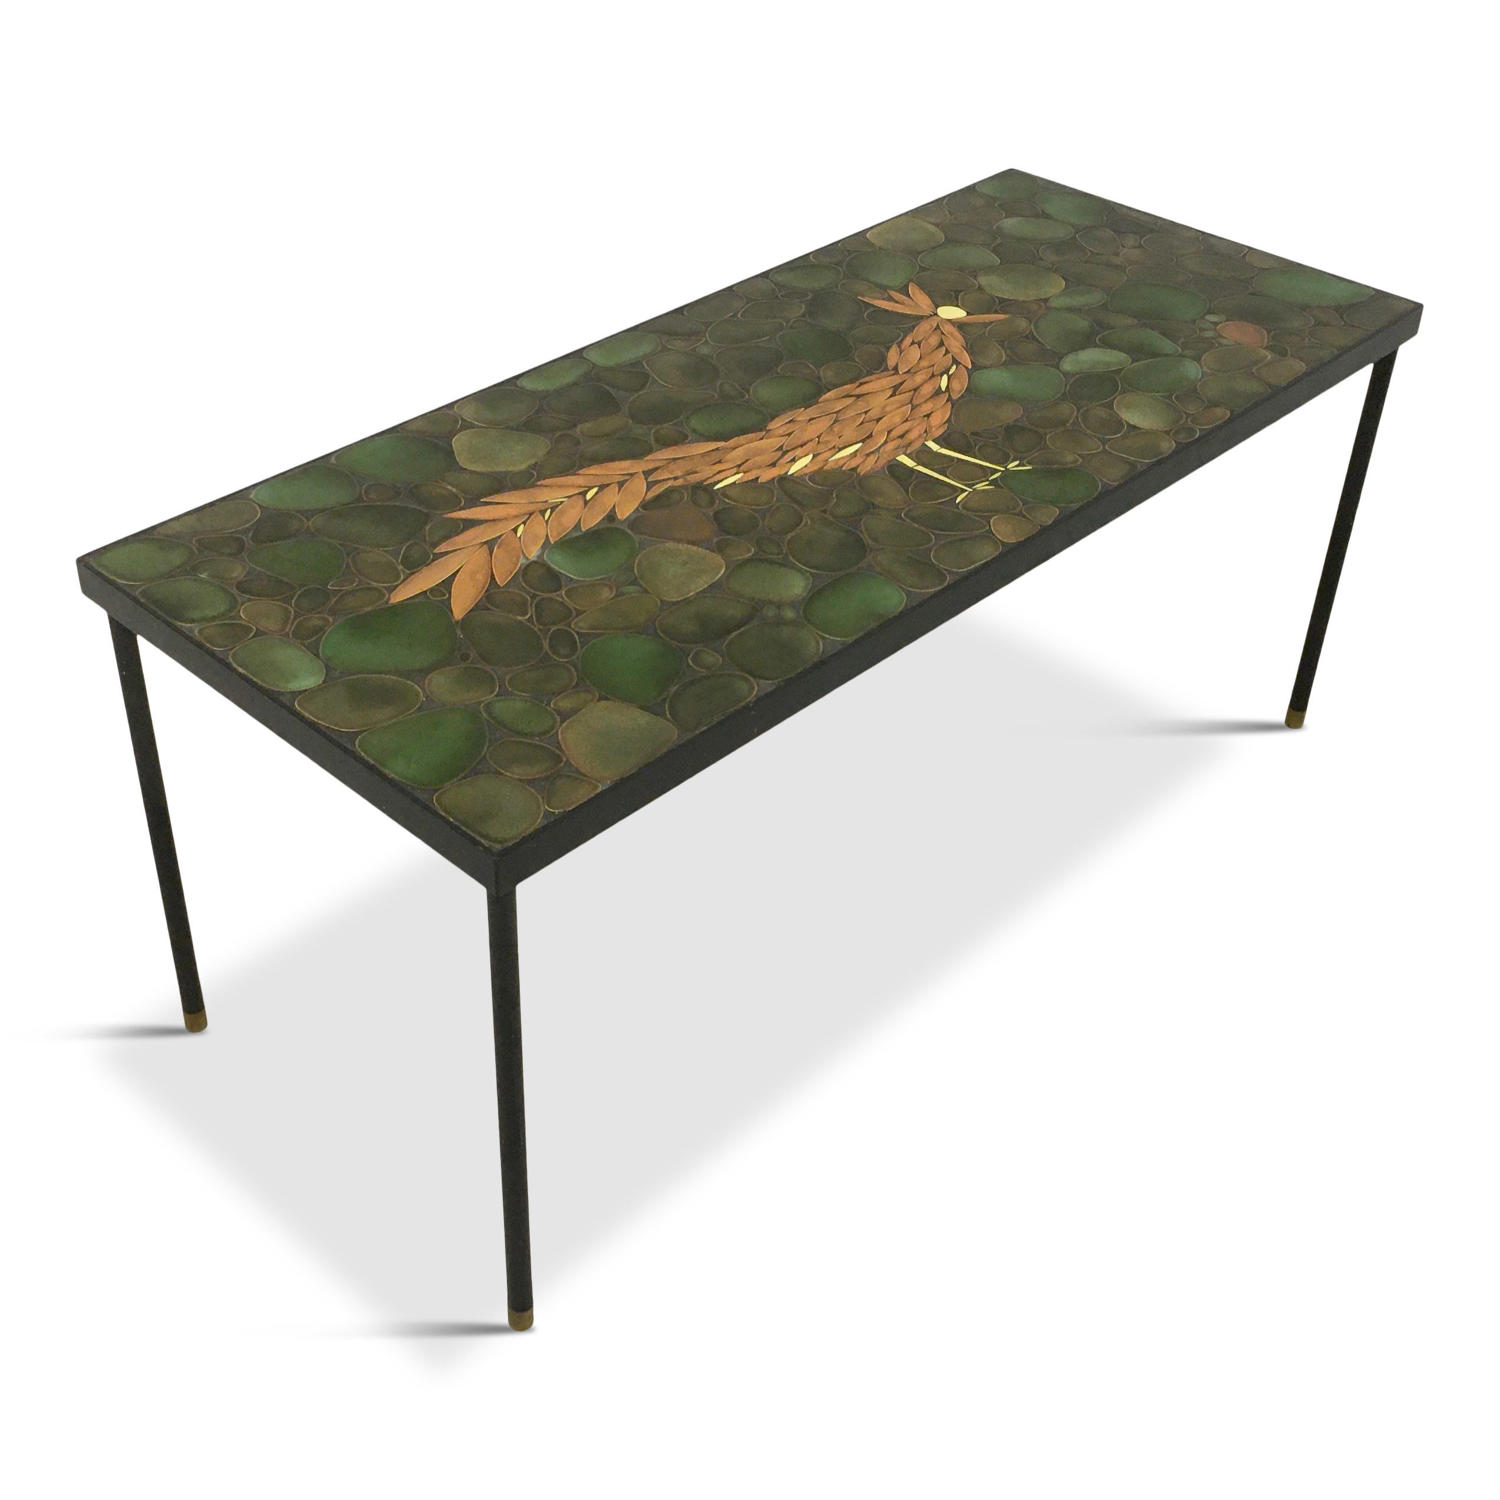 Ceramic, steel and brass coffee table